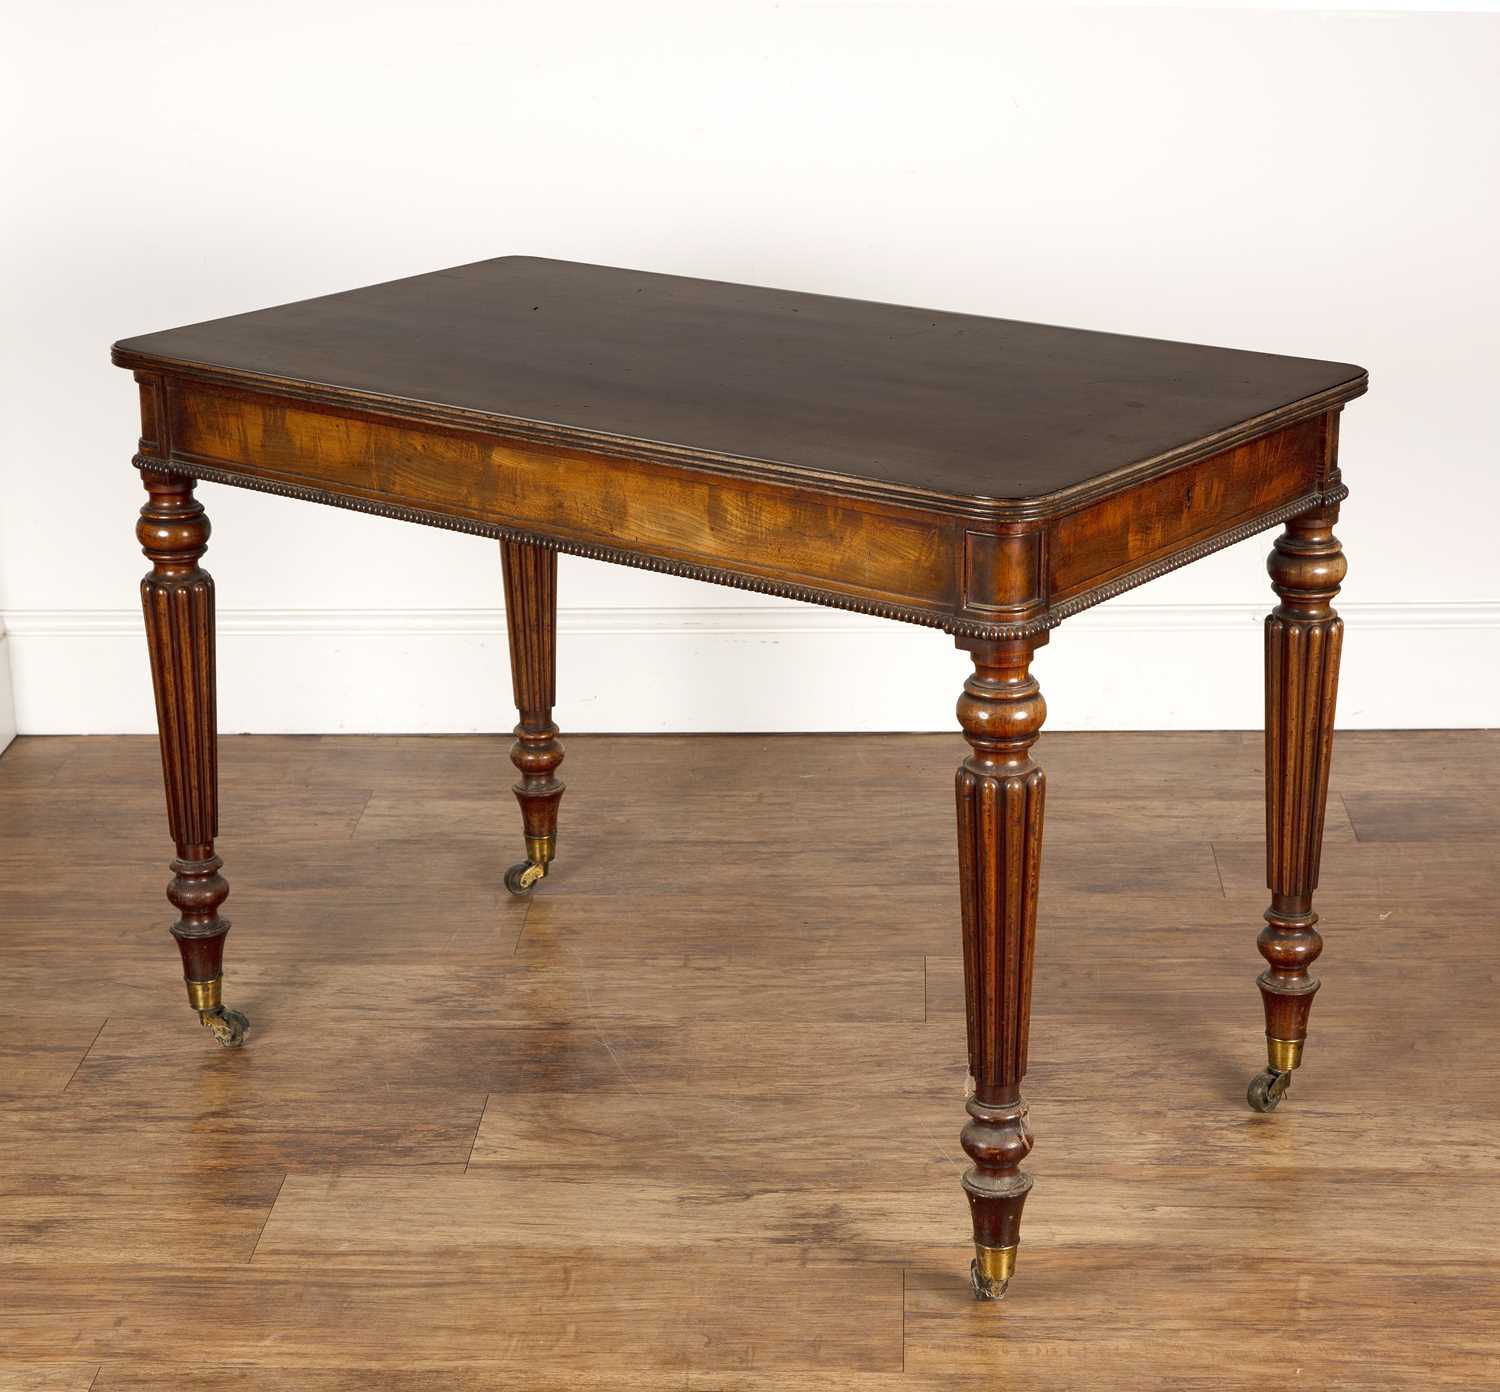 Gillows style mahogany desk or table 19th Century, with large double-sided single drawer, with